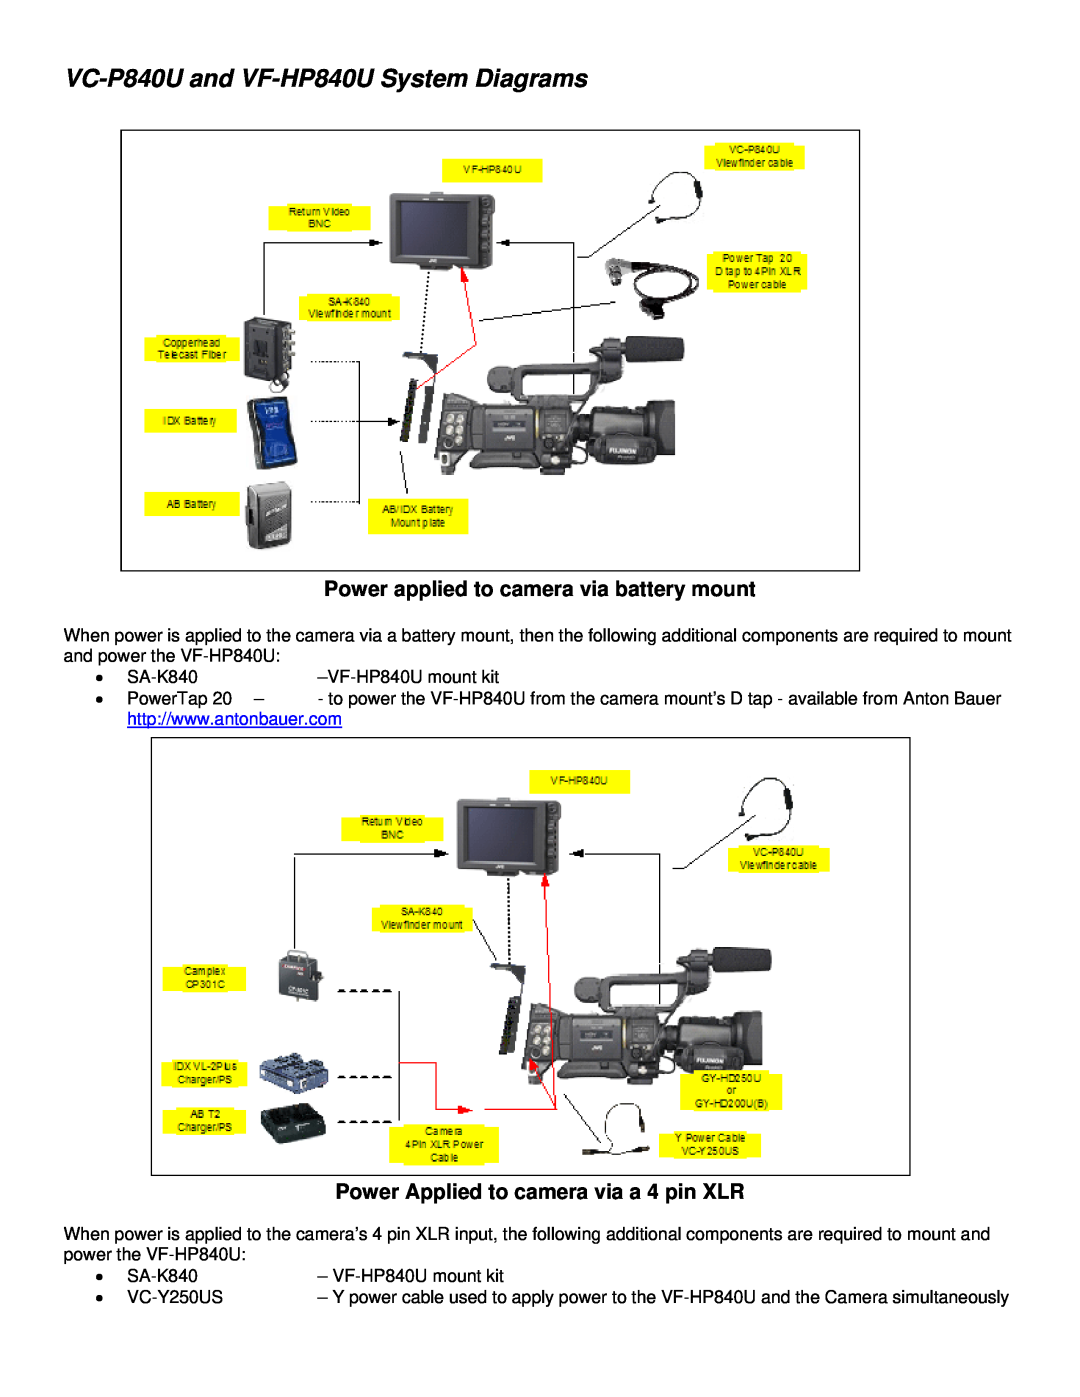 JVC manual VC-P840Uand VF-HP840USystem Diagrams, Power applied to camera via battery mount 